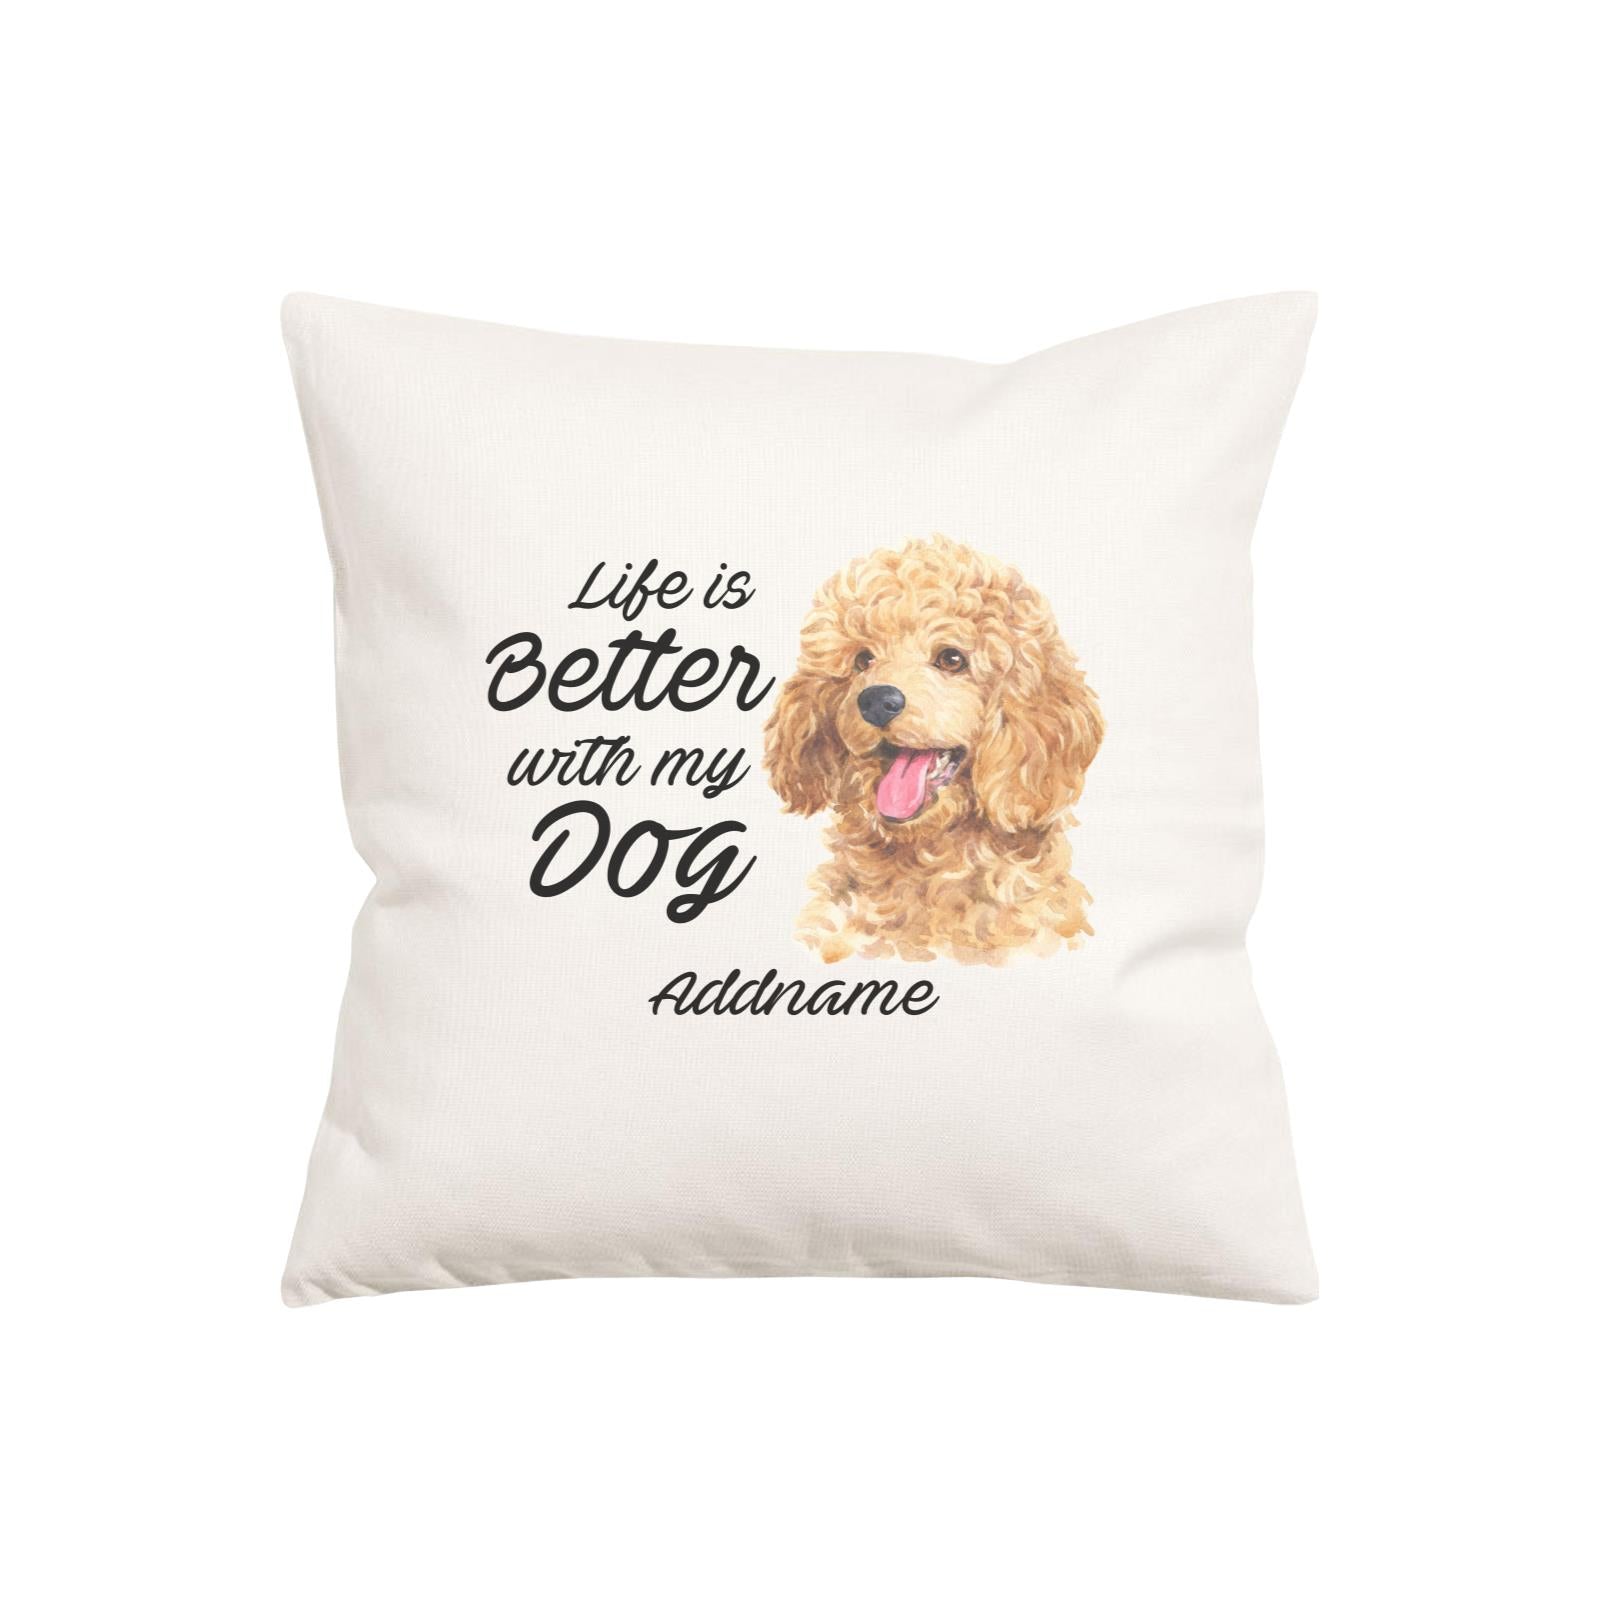 Watercolor Life is Better With My Dog Poodle Gold Addname Pillow Cushion